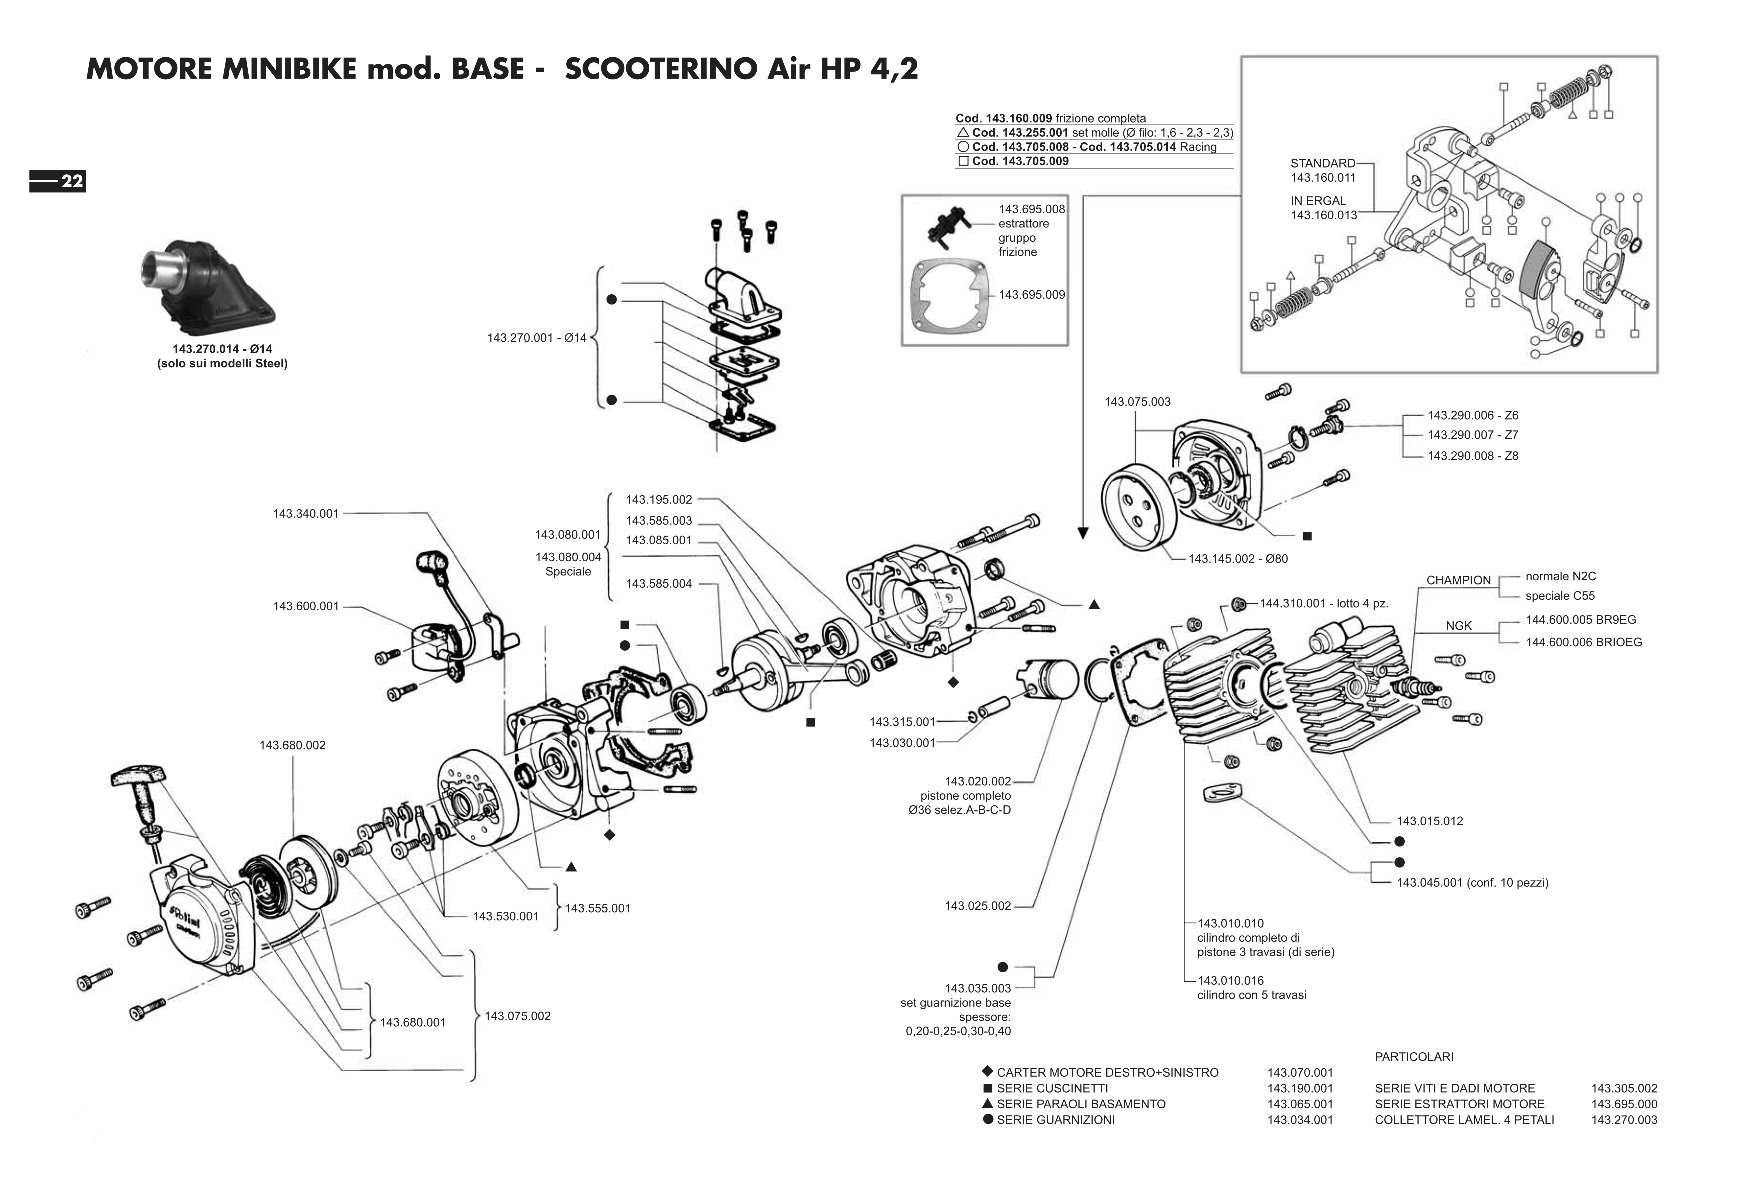 Exploded view Engine (HP 4,2)